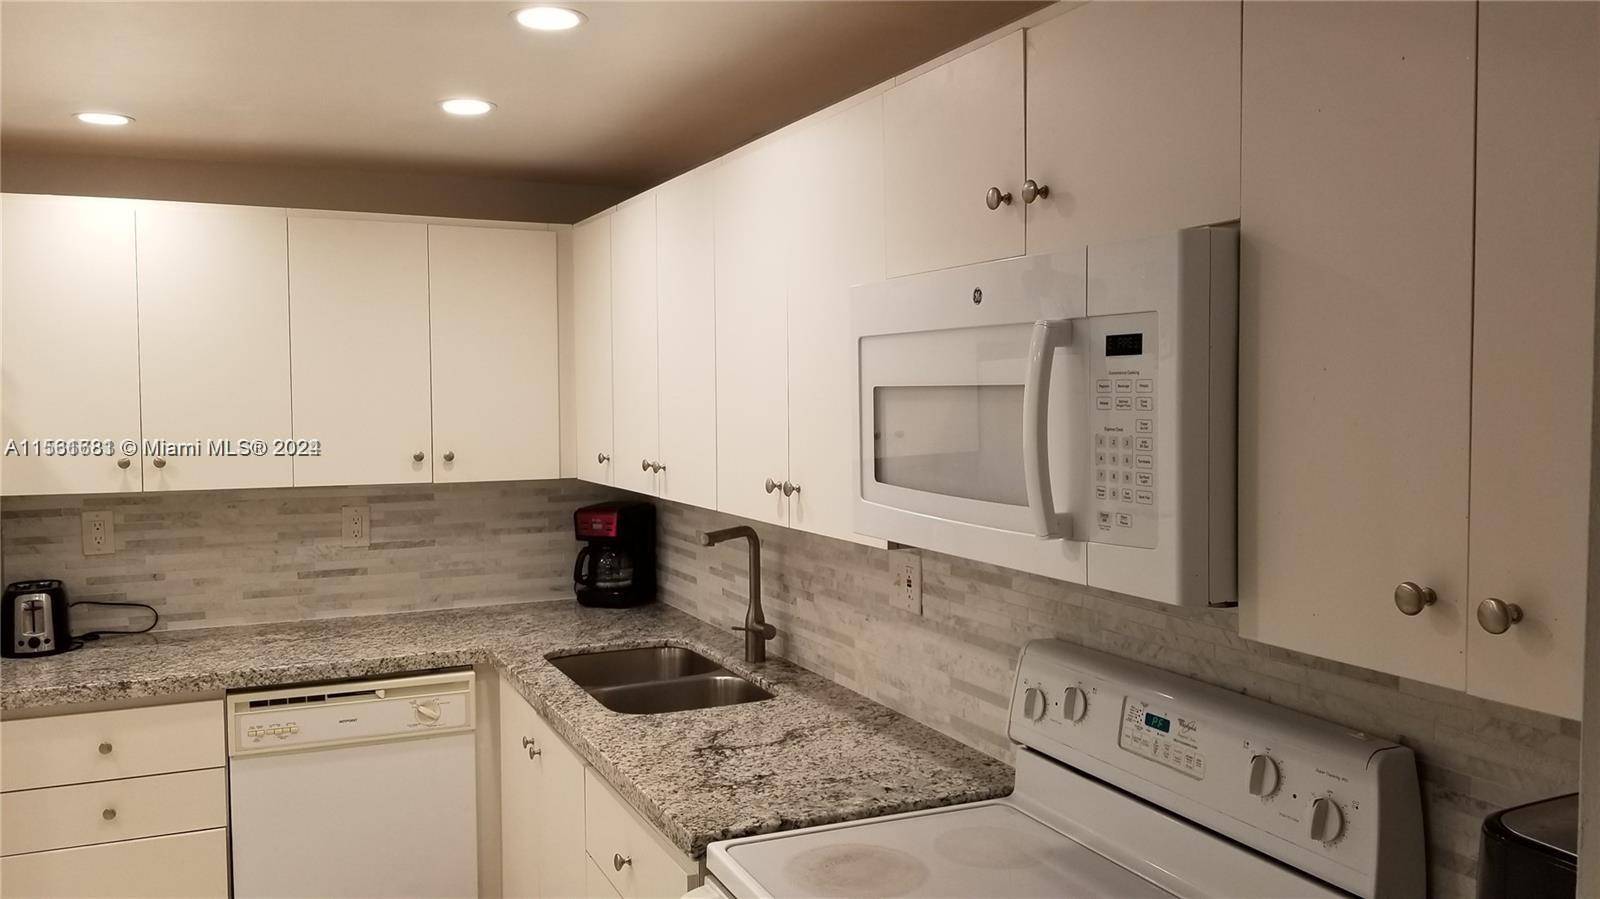 2 bed 2 bath SPLIT condo This unit has a large master bedroom with a walk in closet and a huge master bathroom.